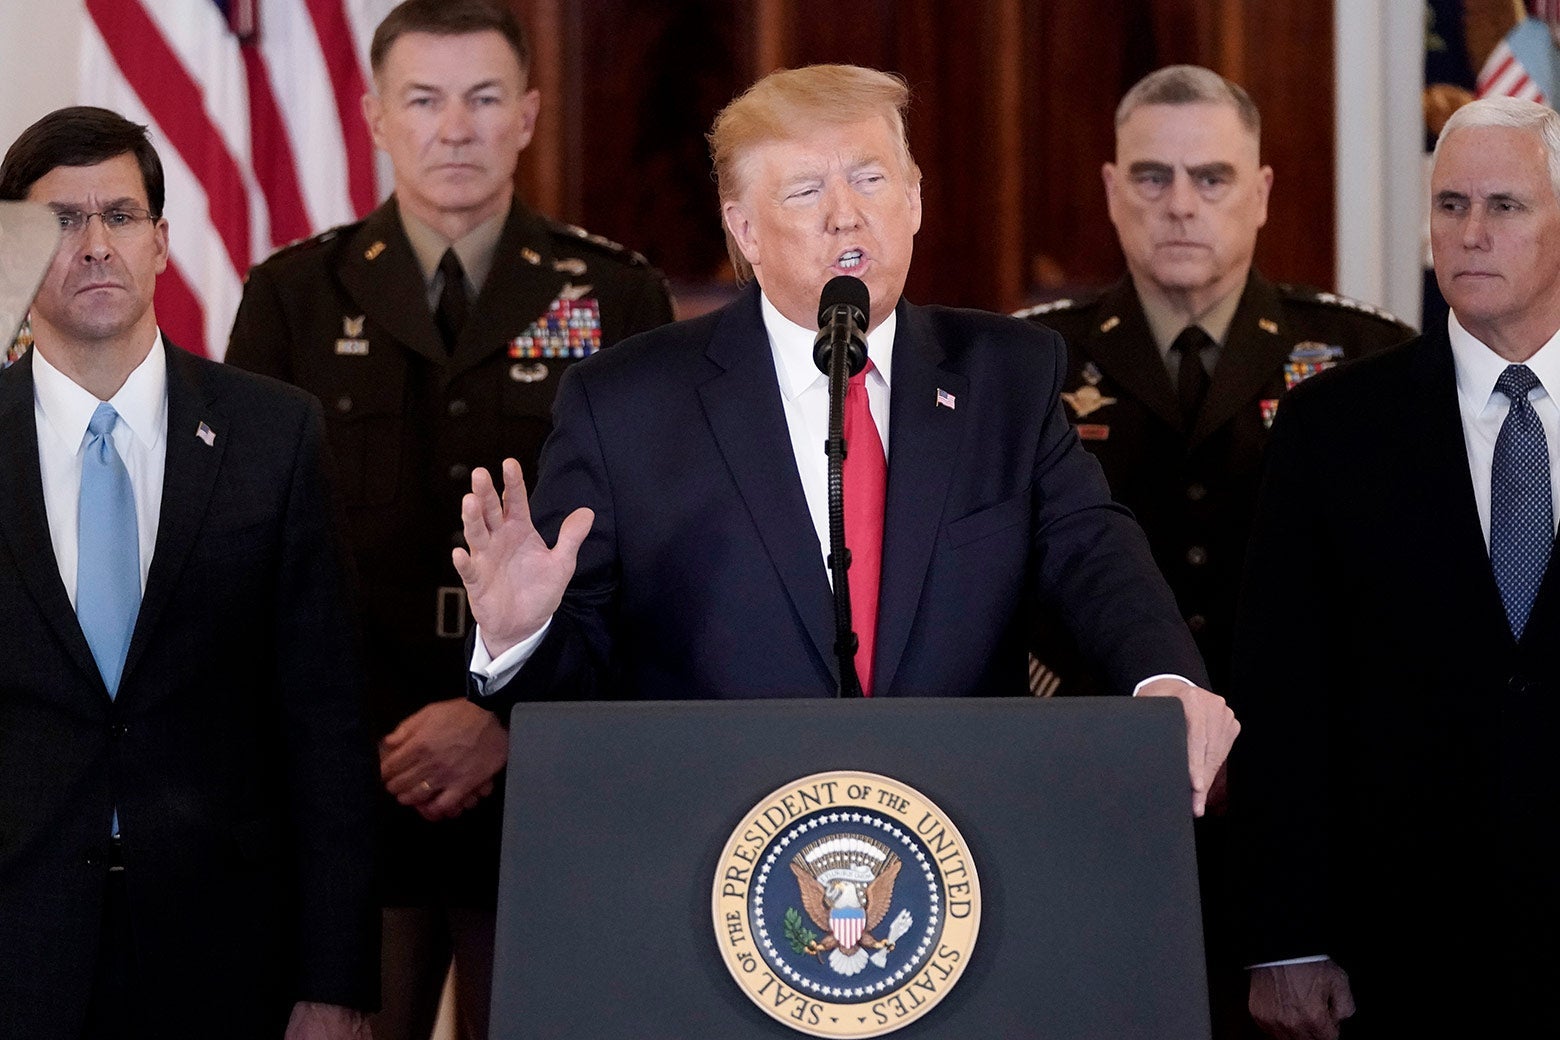 Donald Trump stands at a White House lectern, speaking and raising his hand, as the Joint Chiefs of Staff stand in the background.